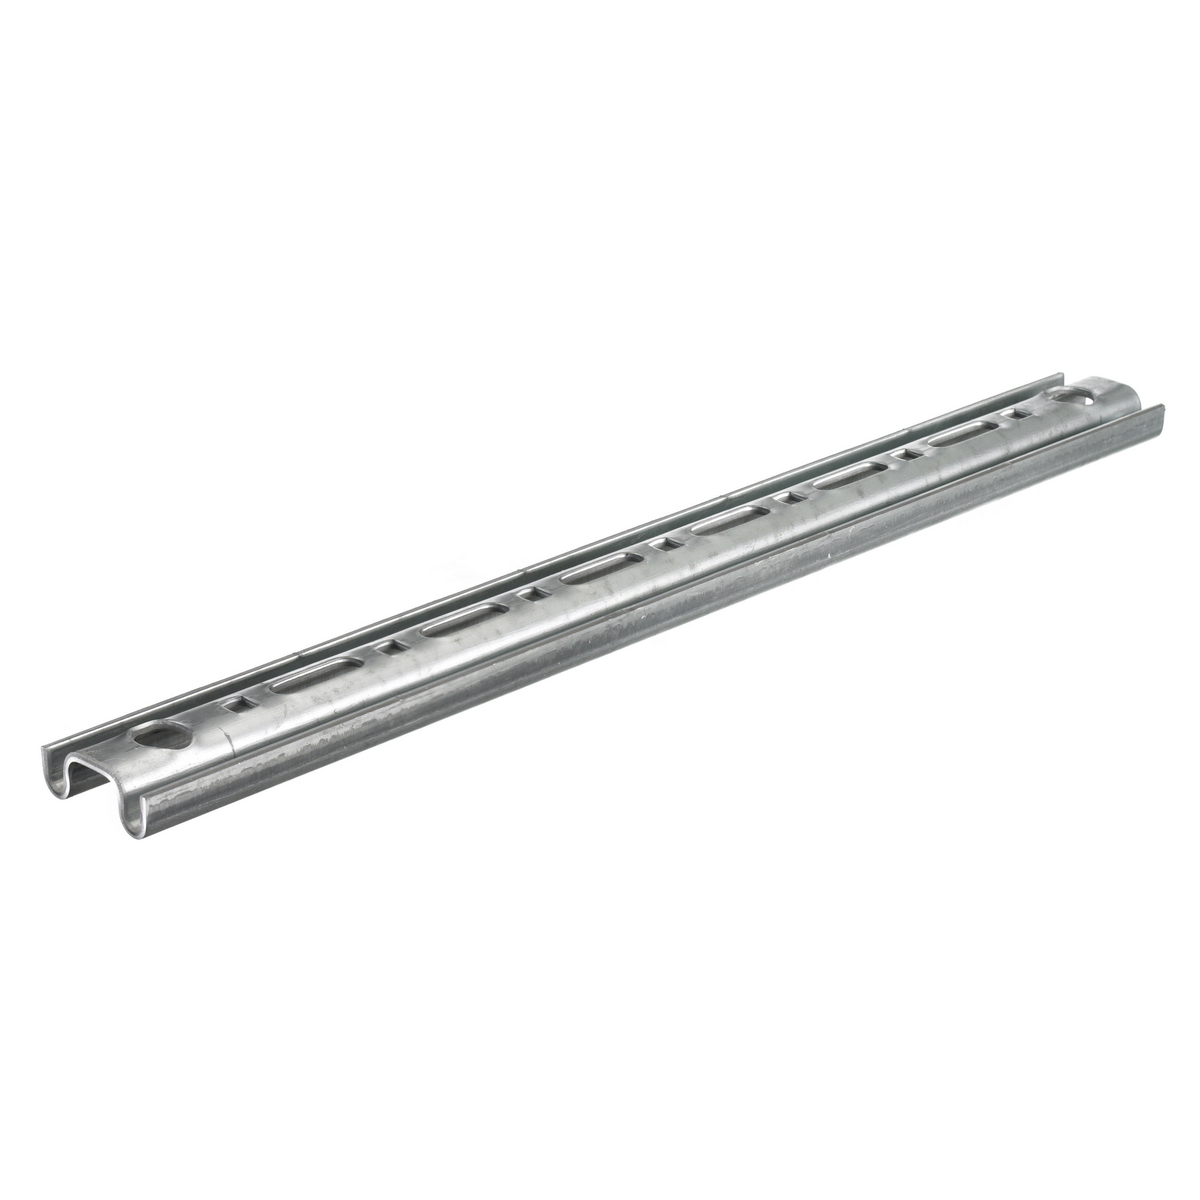 WB,ACCS,CEILINGSUPPORT,16"TRAY,PREGALV